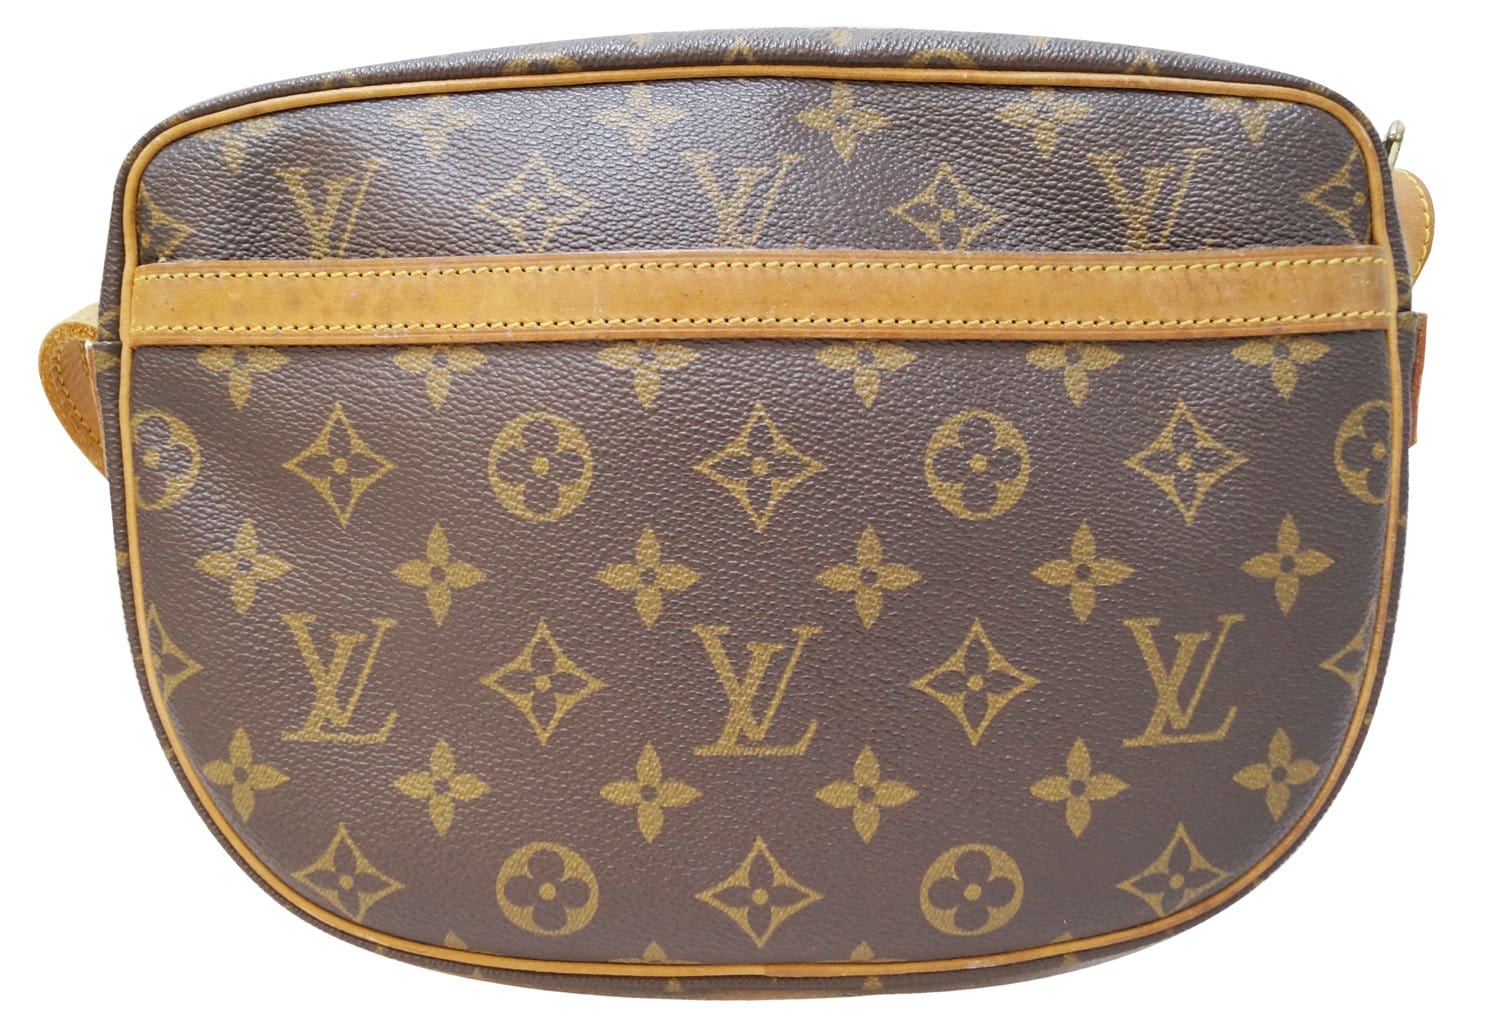 How great is this LV e crossbody bag!!! If you love Louis